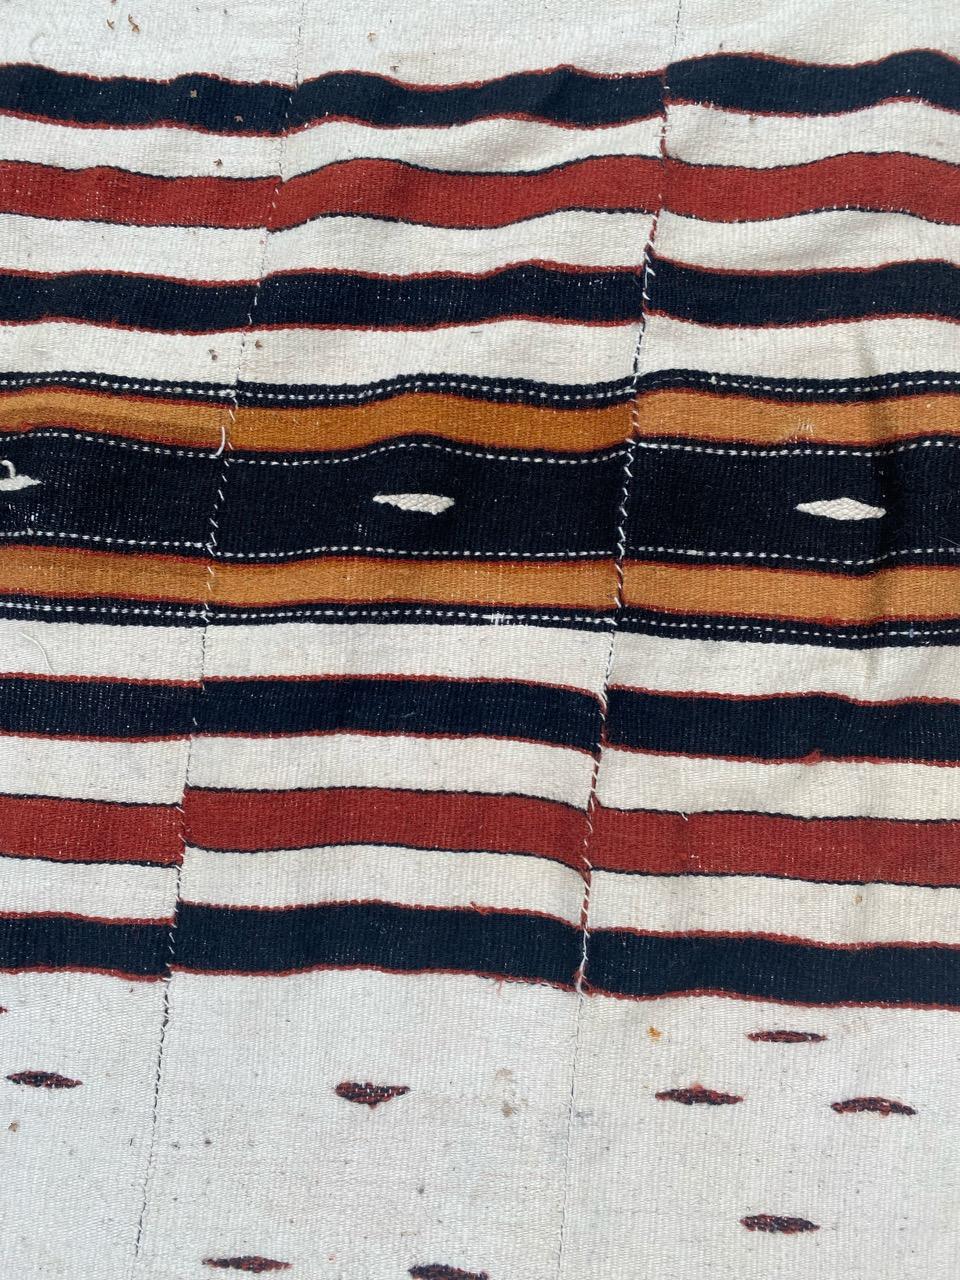 Wool Bobyrug’s Pretty Antique Hand Woven Weaving from Mali For Sale